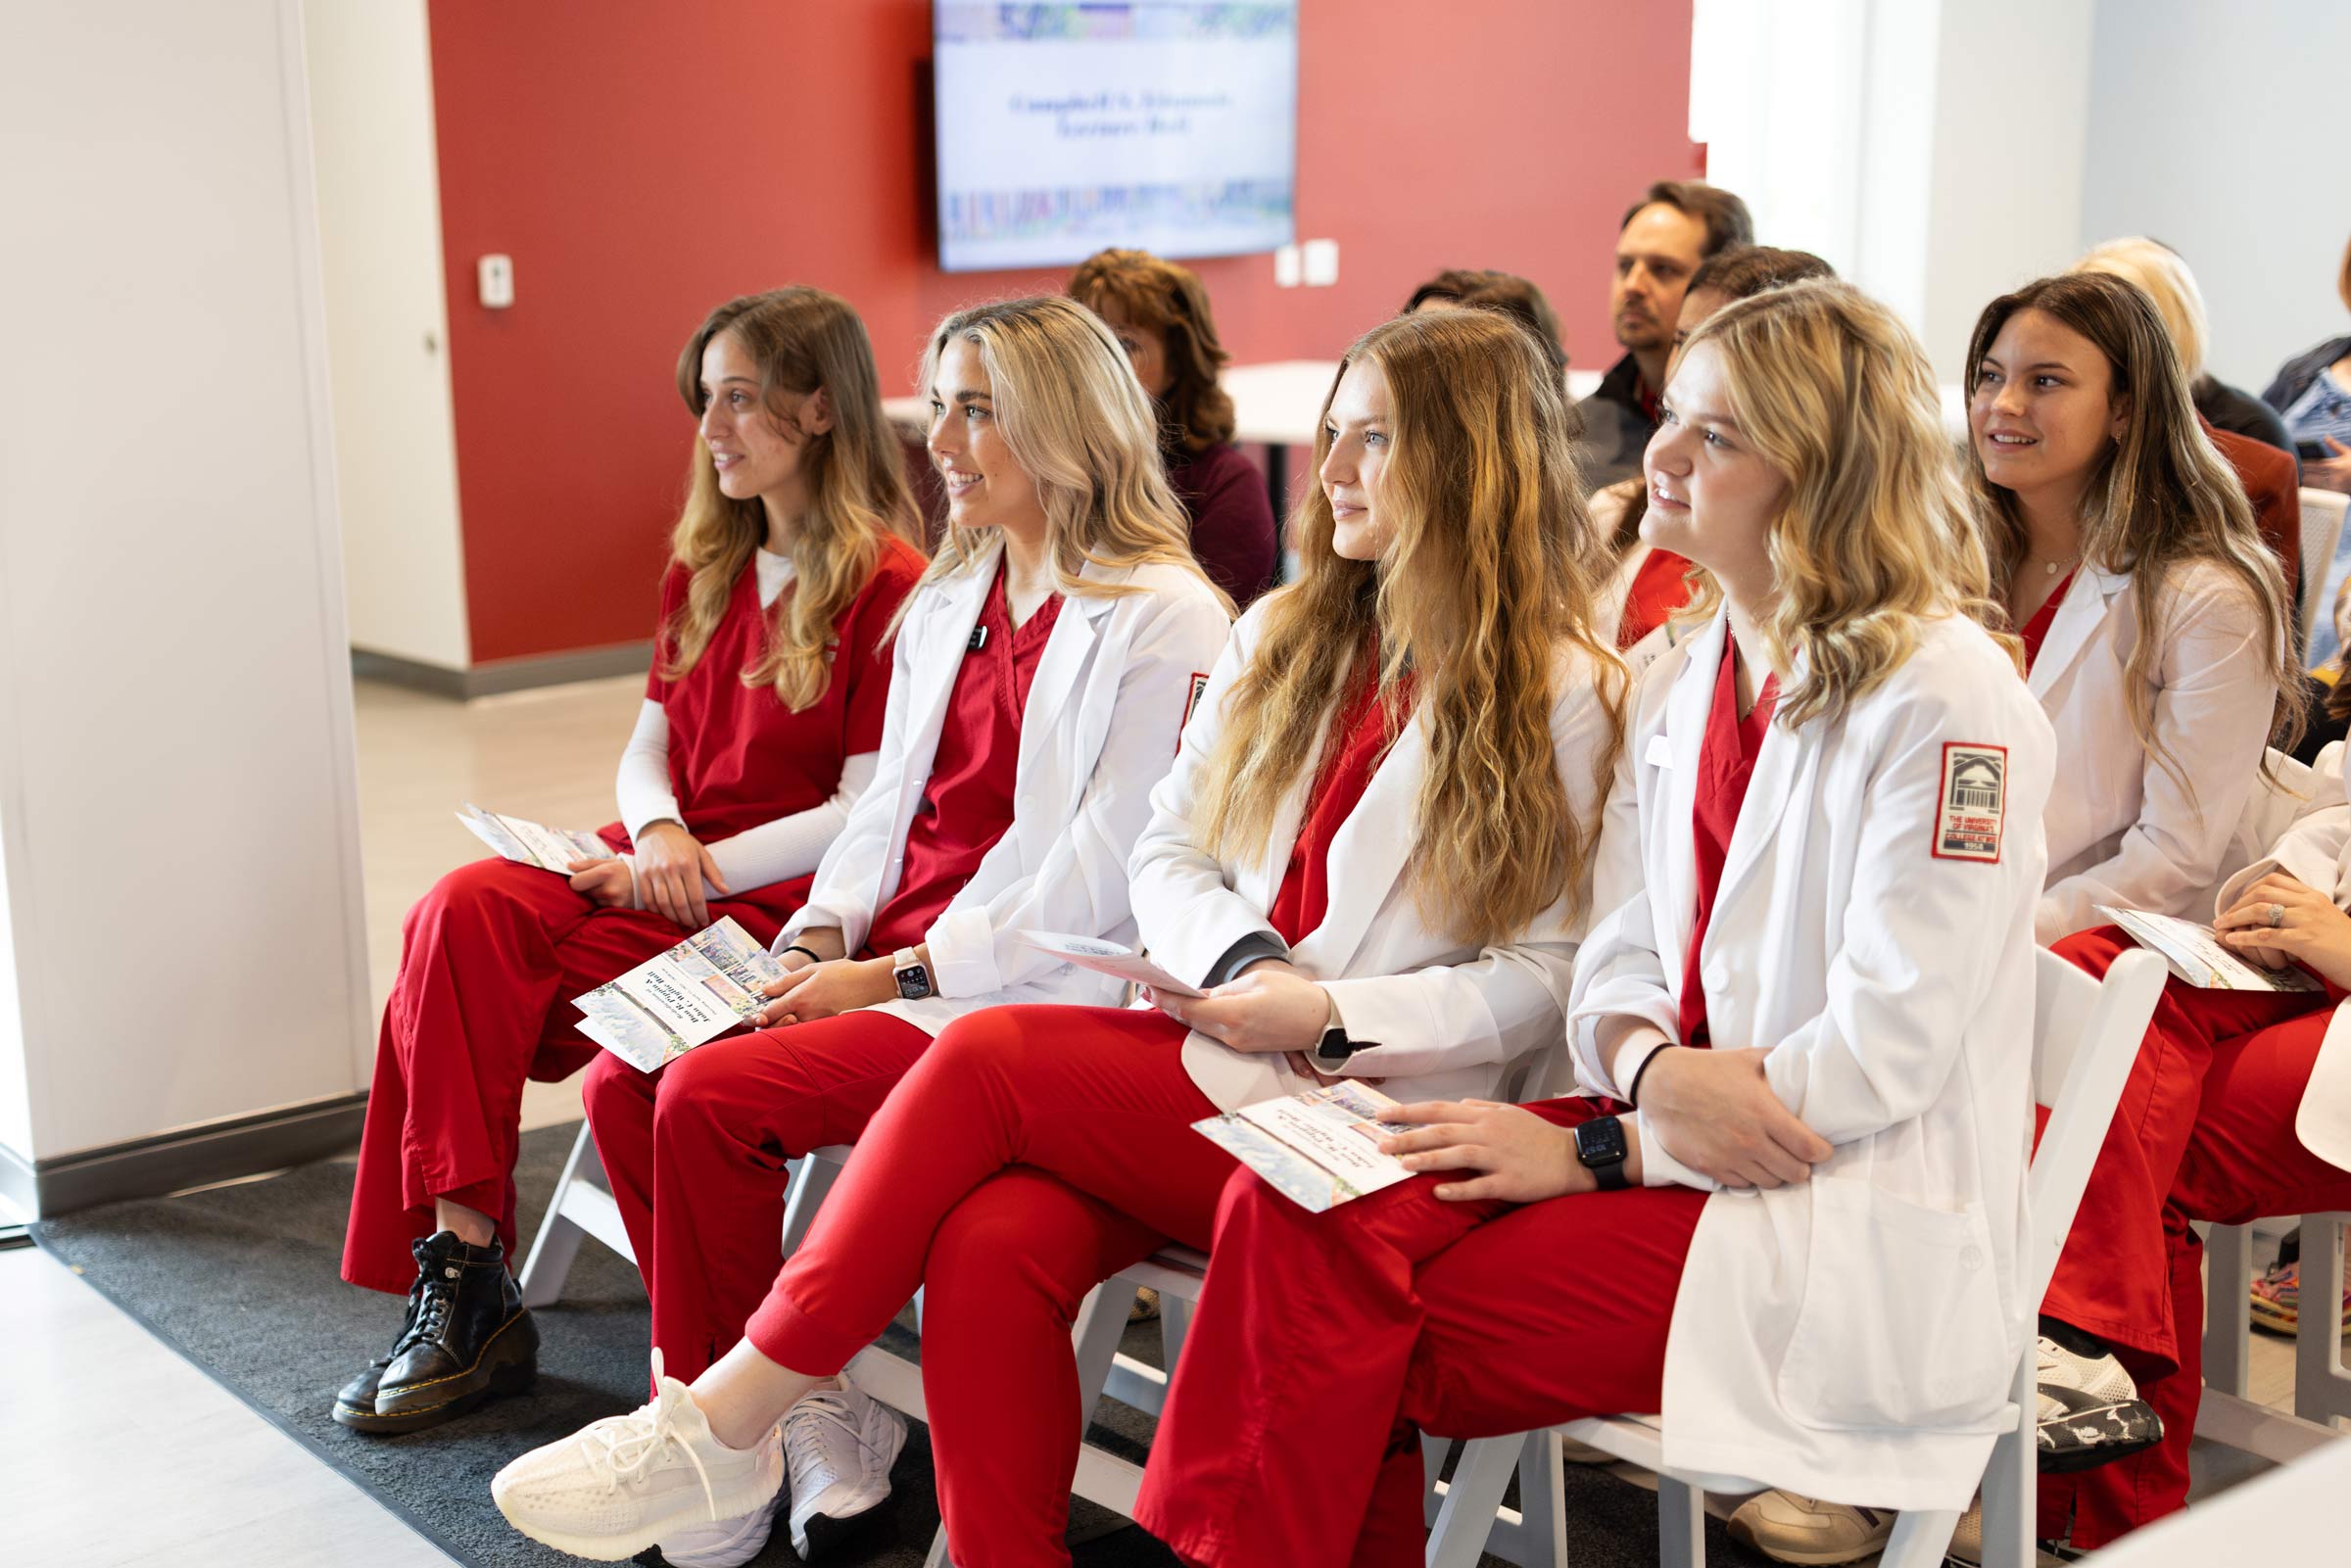 A group of UVA Wise nursing students listens to speakers